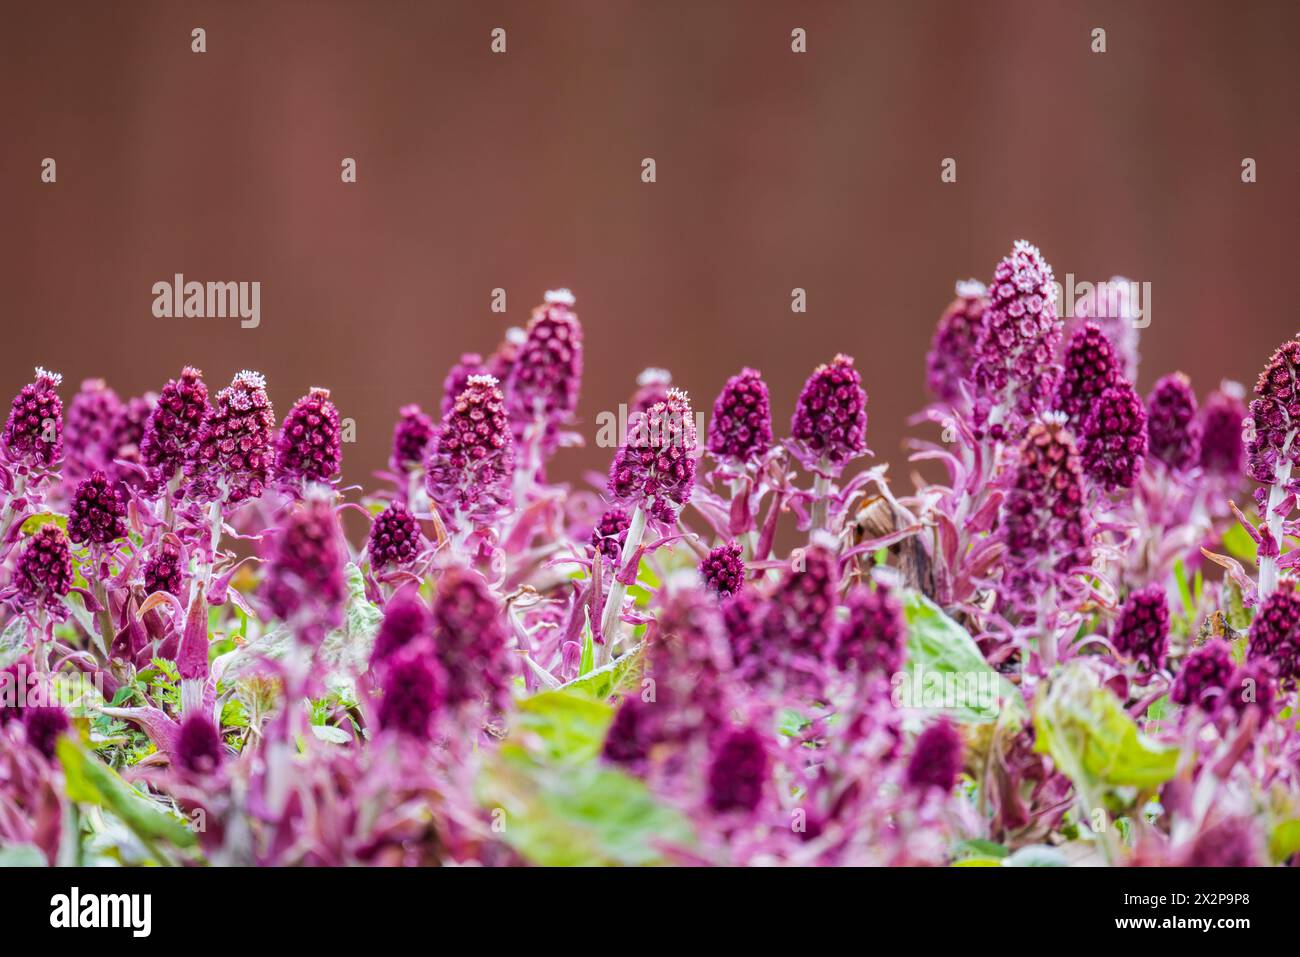 Wild purple flowers are over blurred background. Petasites hybridus, also known as the butterbur, is a herbaceous perennial flowering plant in the fam Stock Photo